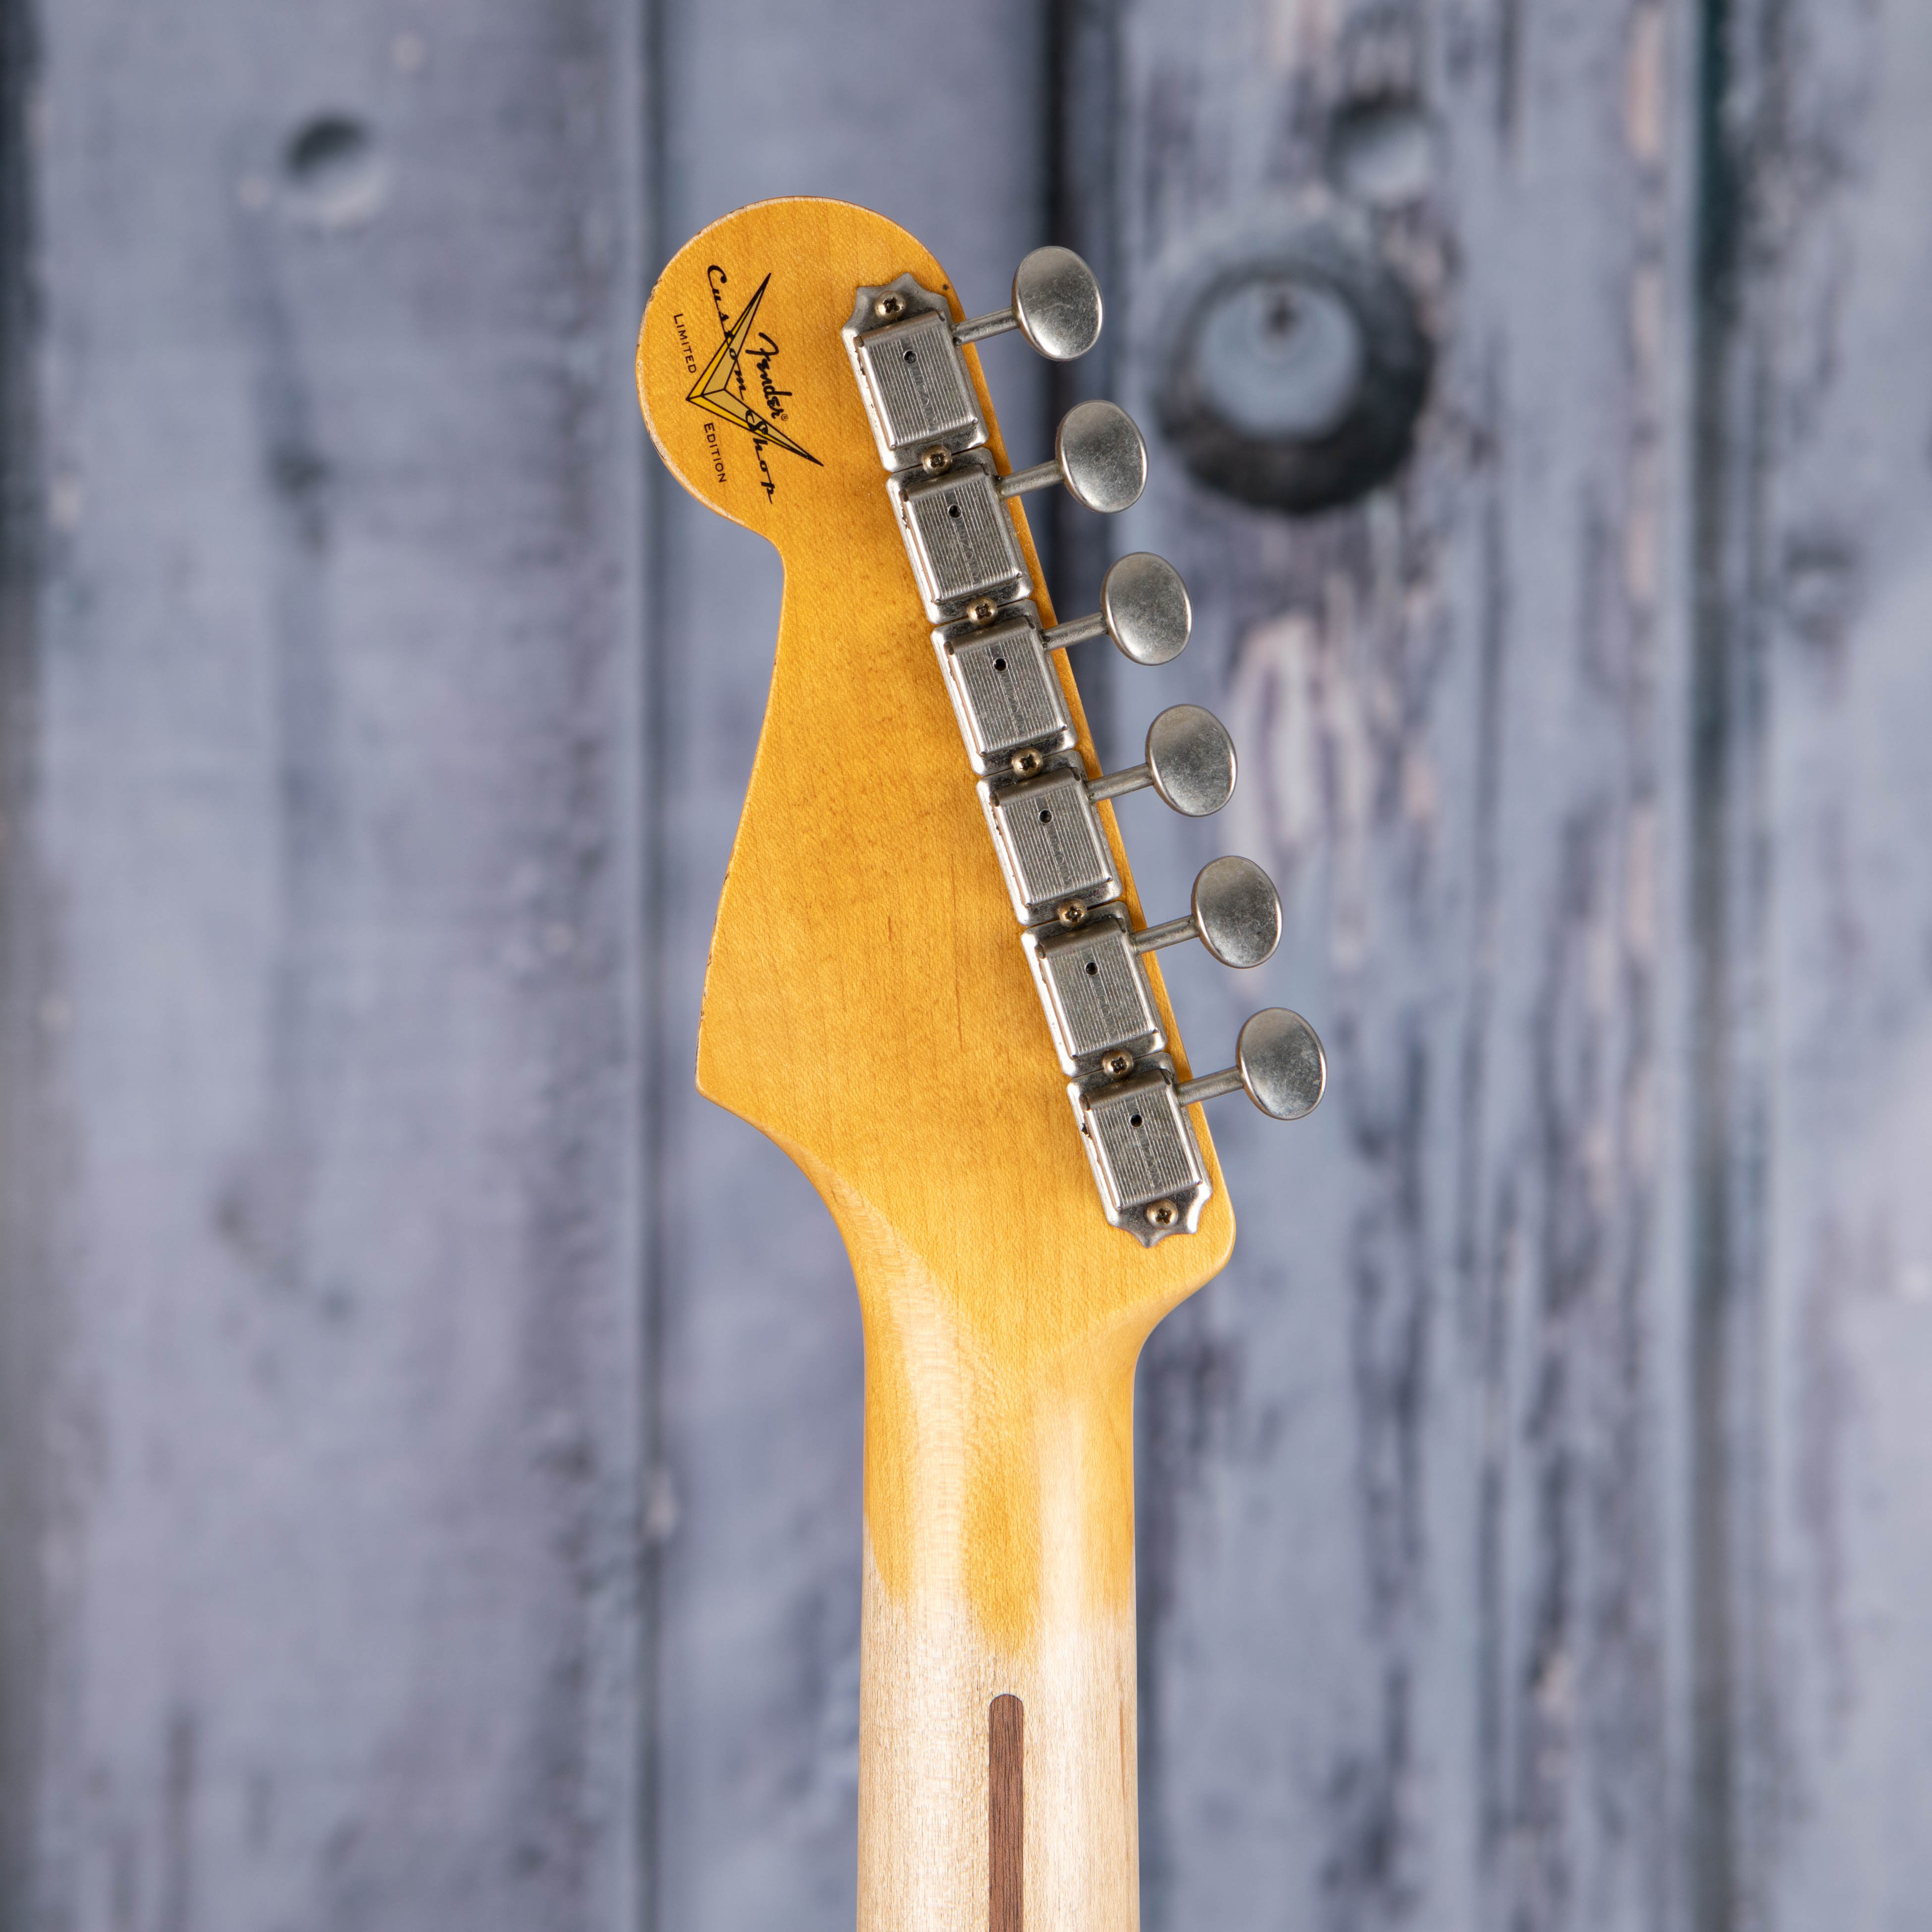 Fender Custom Shop Limited Edition '57 Stratocaster Relic Electric Guitar, Aged Tahitian Coral, back headstock